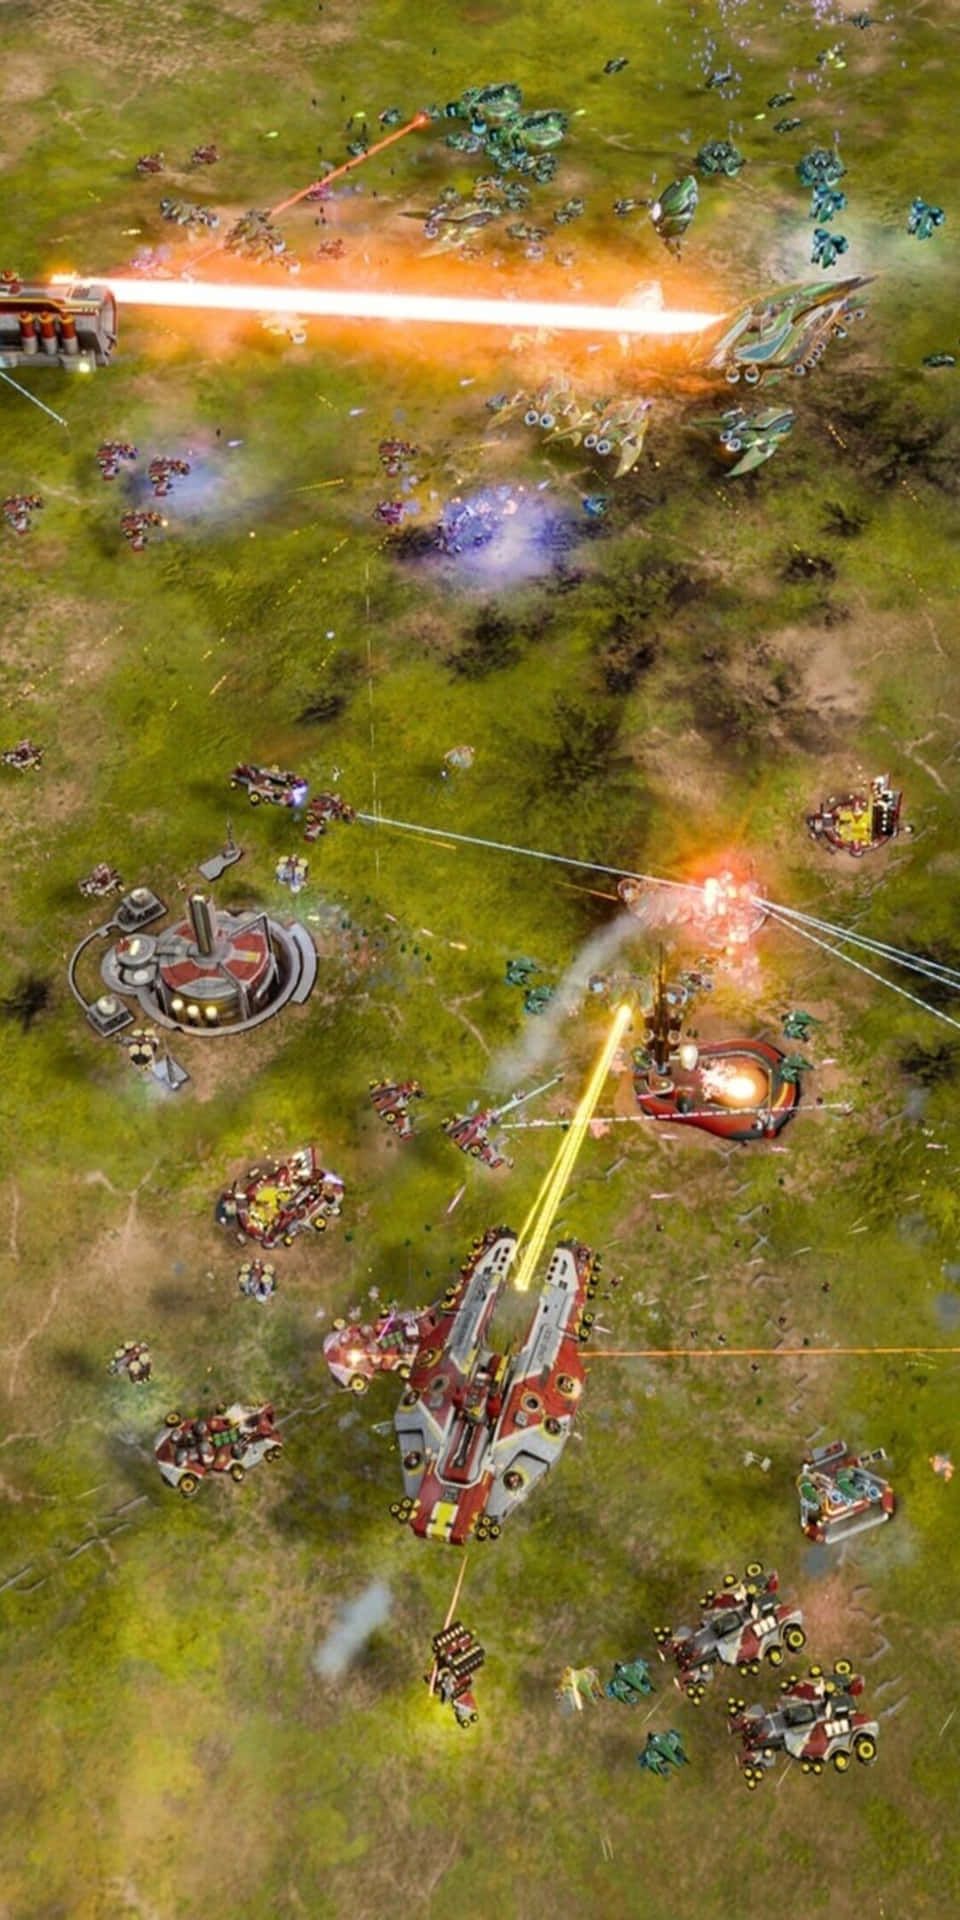 Get lost in the vast world of Pixel 3 gaming with Ashes Of The Singularity